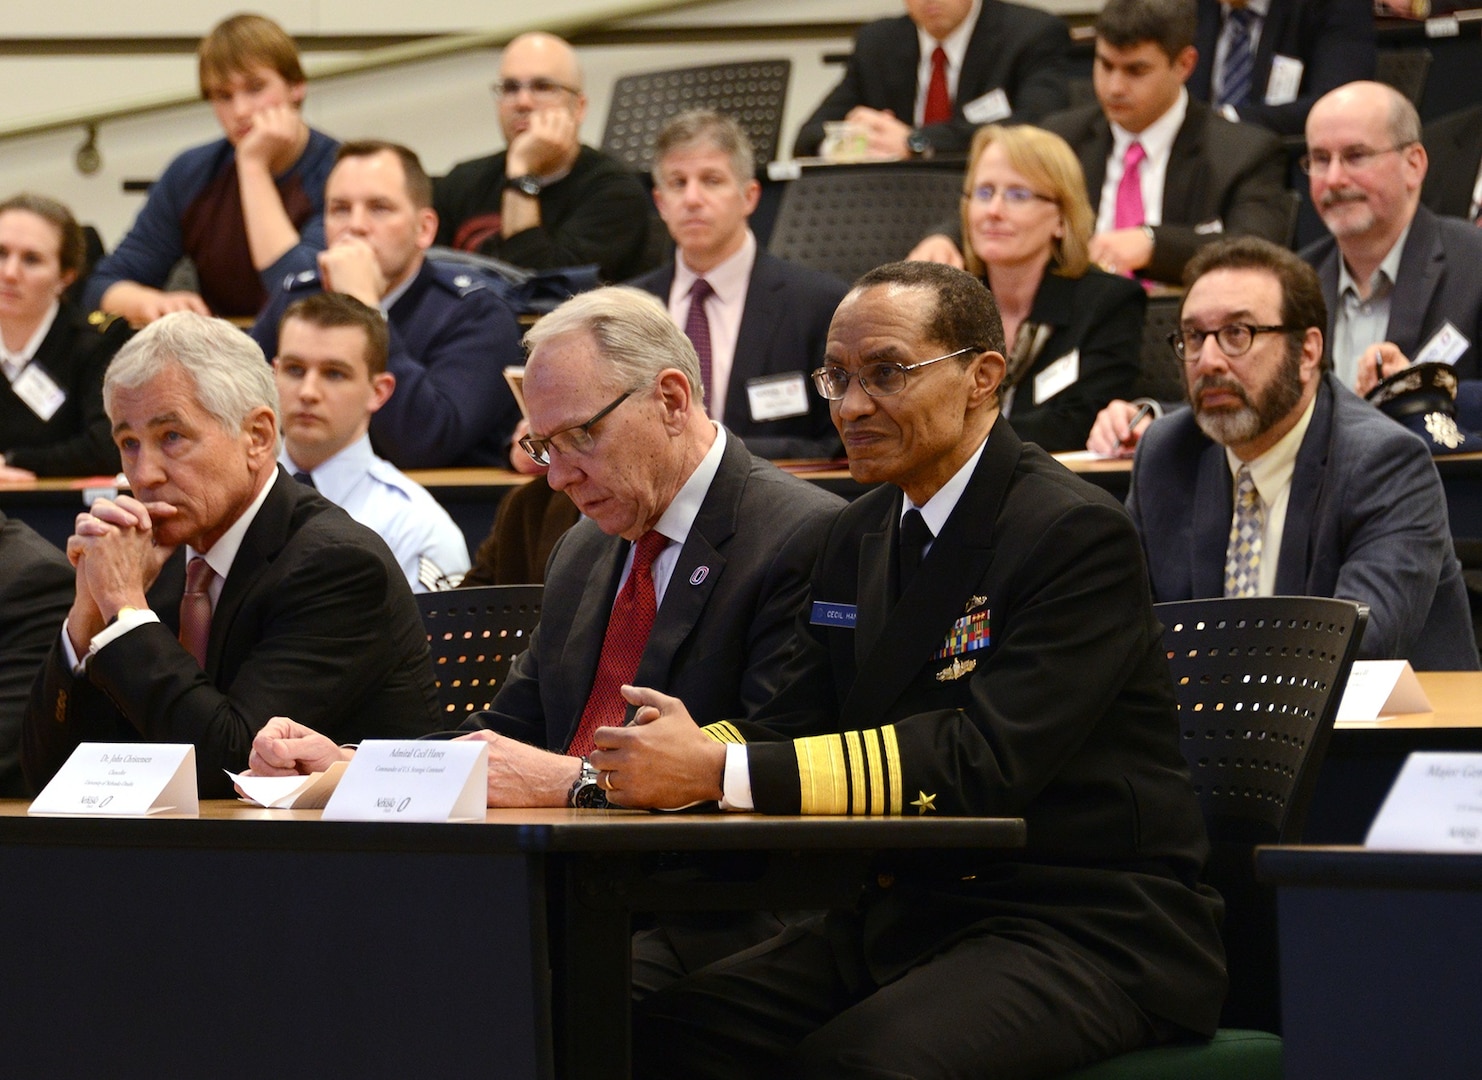 Front row, right to left: U.S. Navy Adm. Cecil D. Haney, U.S. Strategic Command (USSTRATCOM) commander; former Secretary of Defense Chuck Hagel; and Dr. John Christensen, University of Nebraska chancellor; listen to the opening remarks during the 2016 Deterrence and Assurance Workshop and Conference at the University of Nebraska at Omahaâ€™s (UNO) College of Public Affairs and Community Service, Omaha, Neb., March 3, 2016. Secretary Hagel provided the keynote address at the conference, during which he discussed the current and future strategic environment, his personal experiences as a student at UNO and USSTRATCOMâ€™s role in regional and global security. In his remarks, Haney discussed deterrence and assurance, the importance of USSTRATCOMâ€™s collaboration with academic institutions and the need to develop future leaders. Dr. Christensen also presented remarks, and introduced Secretary Hagel during the event, which was organized by the University of Nebraska at Omahaâ€™s Department of Political Science and USSTRATCOM's Deterrence and Assurance Academic Alliance. The alliance includes 23 local and national universities and was started in Oct. 2014 to stimulate new thinking and develop future generations of deterrence practitioners. One of nine DoD unified combatant commands, USSTRATCOM has global strategic missions, assigned through the Unified Command Plan, which include strategic deterrence; space operations; cyberspace operations; joint electronic warfare; global strike; missile defense; intelligence, surveillance and reconnaissance; combating weapons of mass destruction; and analysis and targeting. (USSTRATCOM photo by U.S. Air Force Staff Sgt. Jonathan Lovelady)